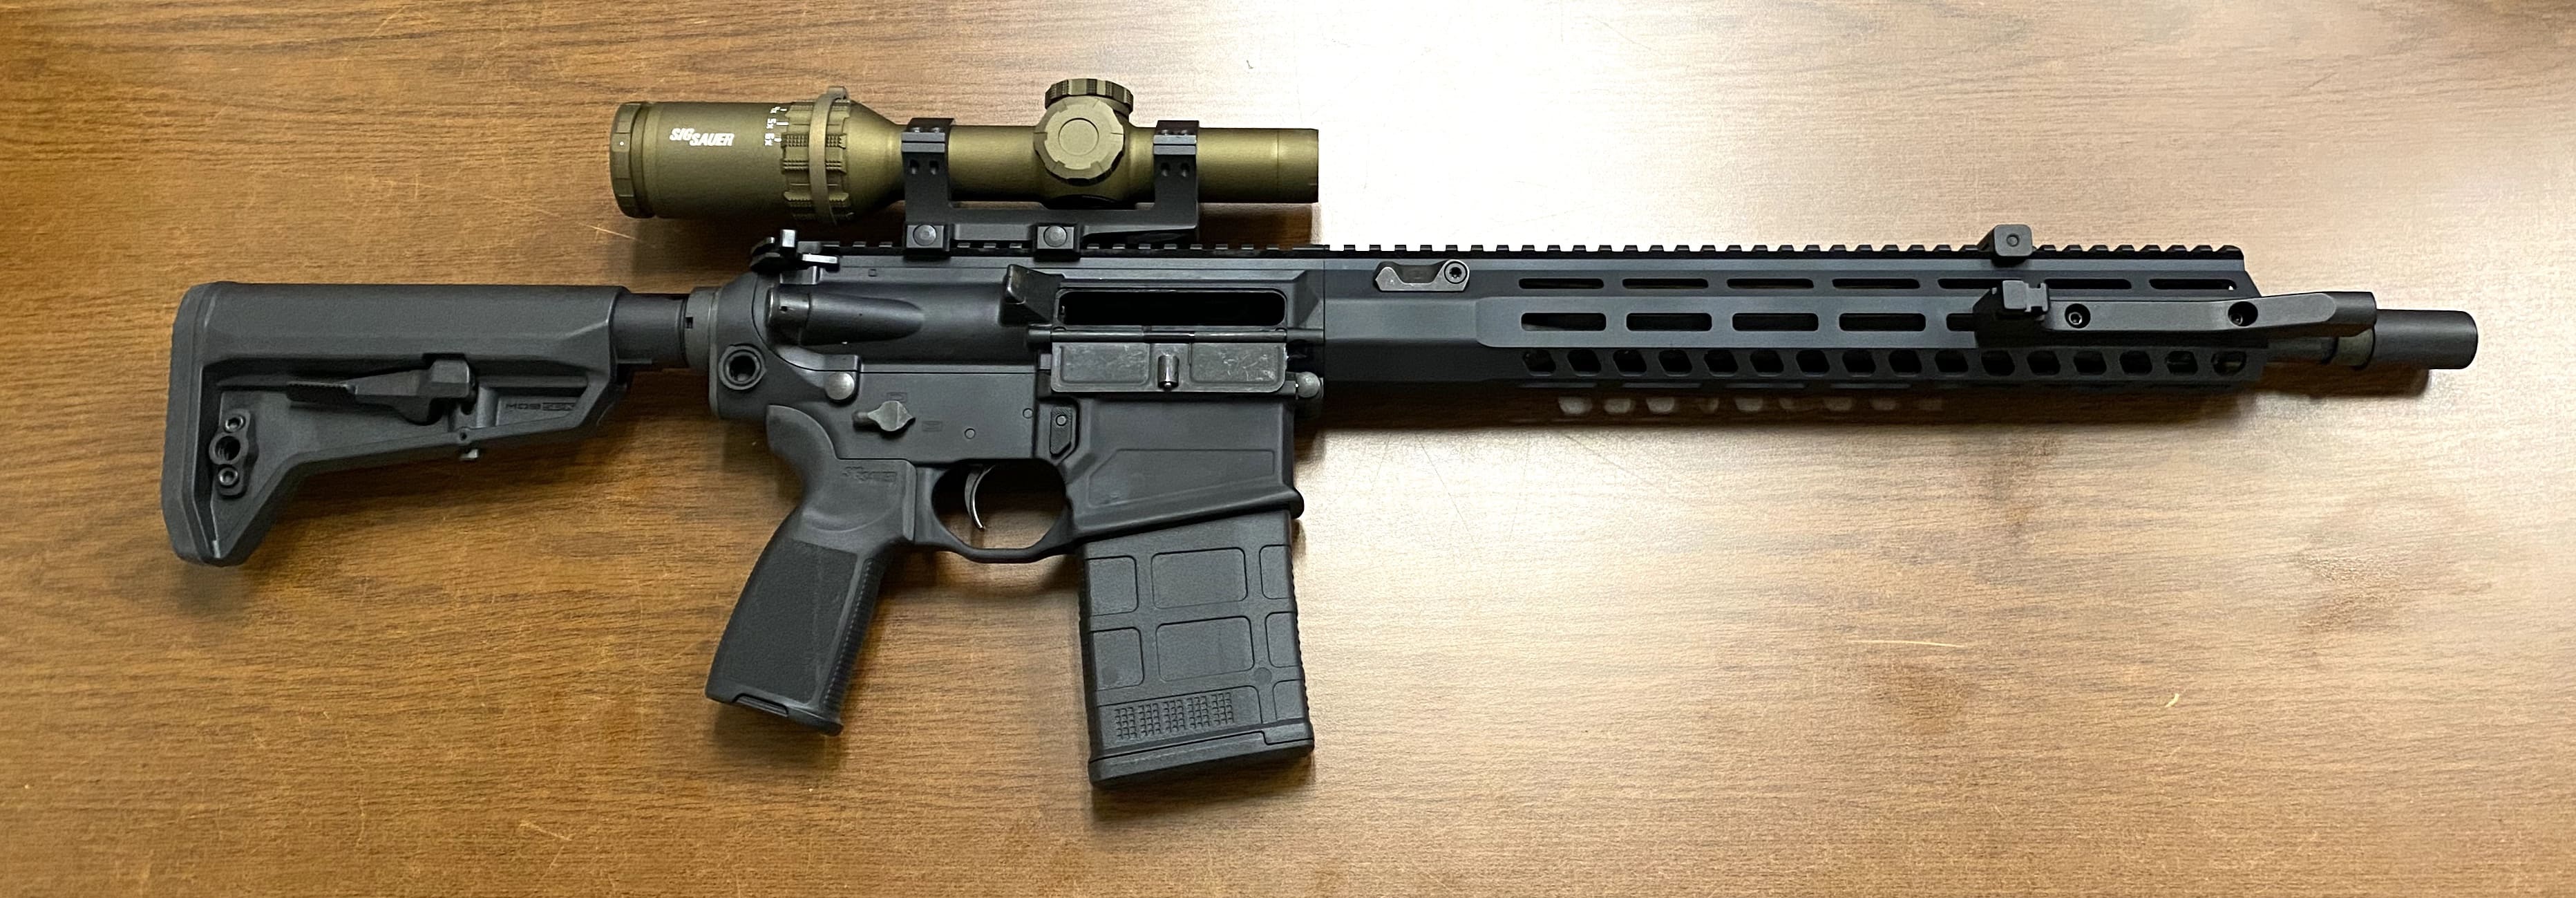 Ah nope, the bayonet is affixed on that M-Lok bayonet mount on side of the ...